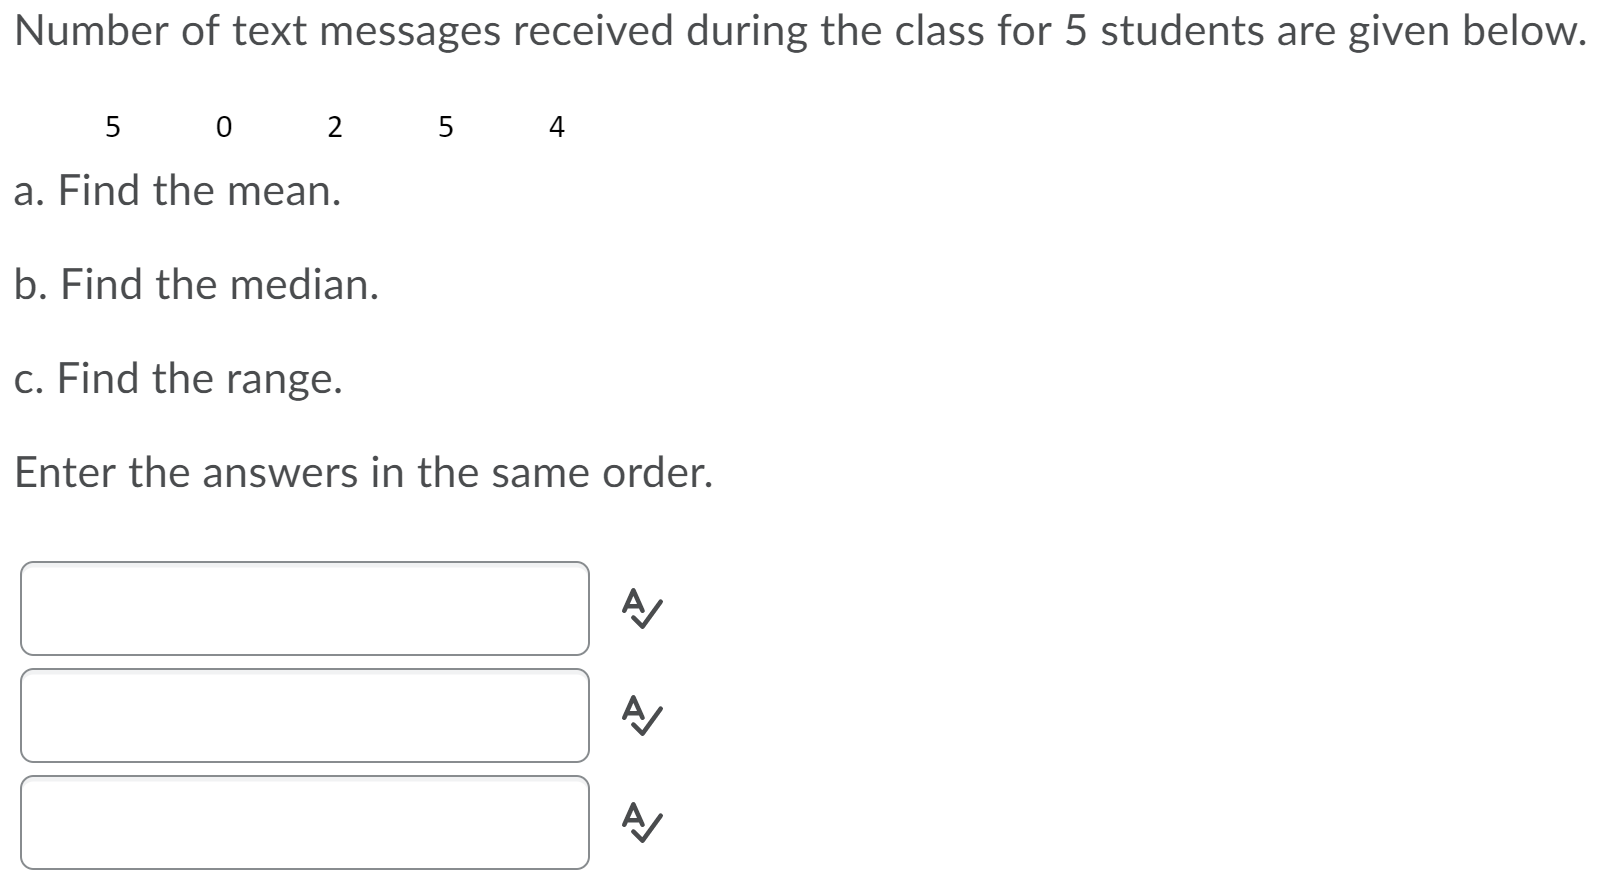 Number of text messages received during the class for 5 students are given below.
5
2
5
4
a. Find the mean.
b. Find the median.
c. Find the range.
Enter the answers in the same order.
